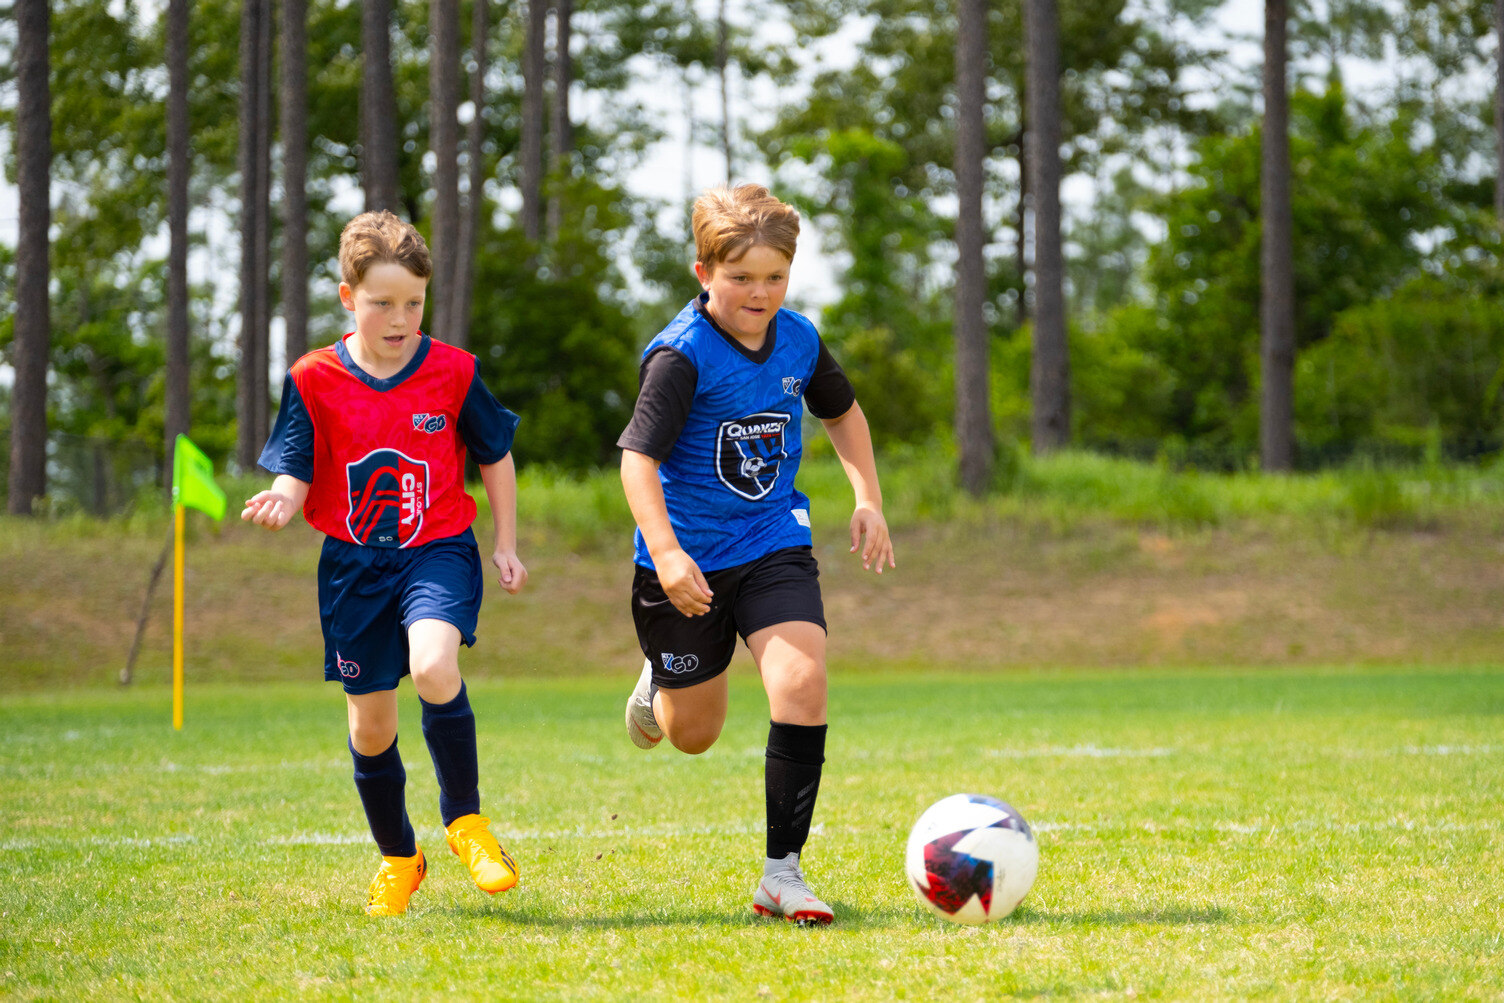 MLS GO, the youth recreational soccer program of MLS (Please Credit_ MLS Communications) (1)